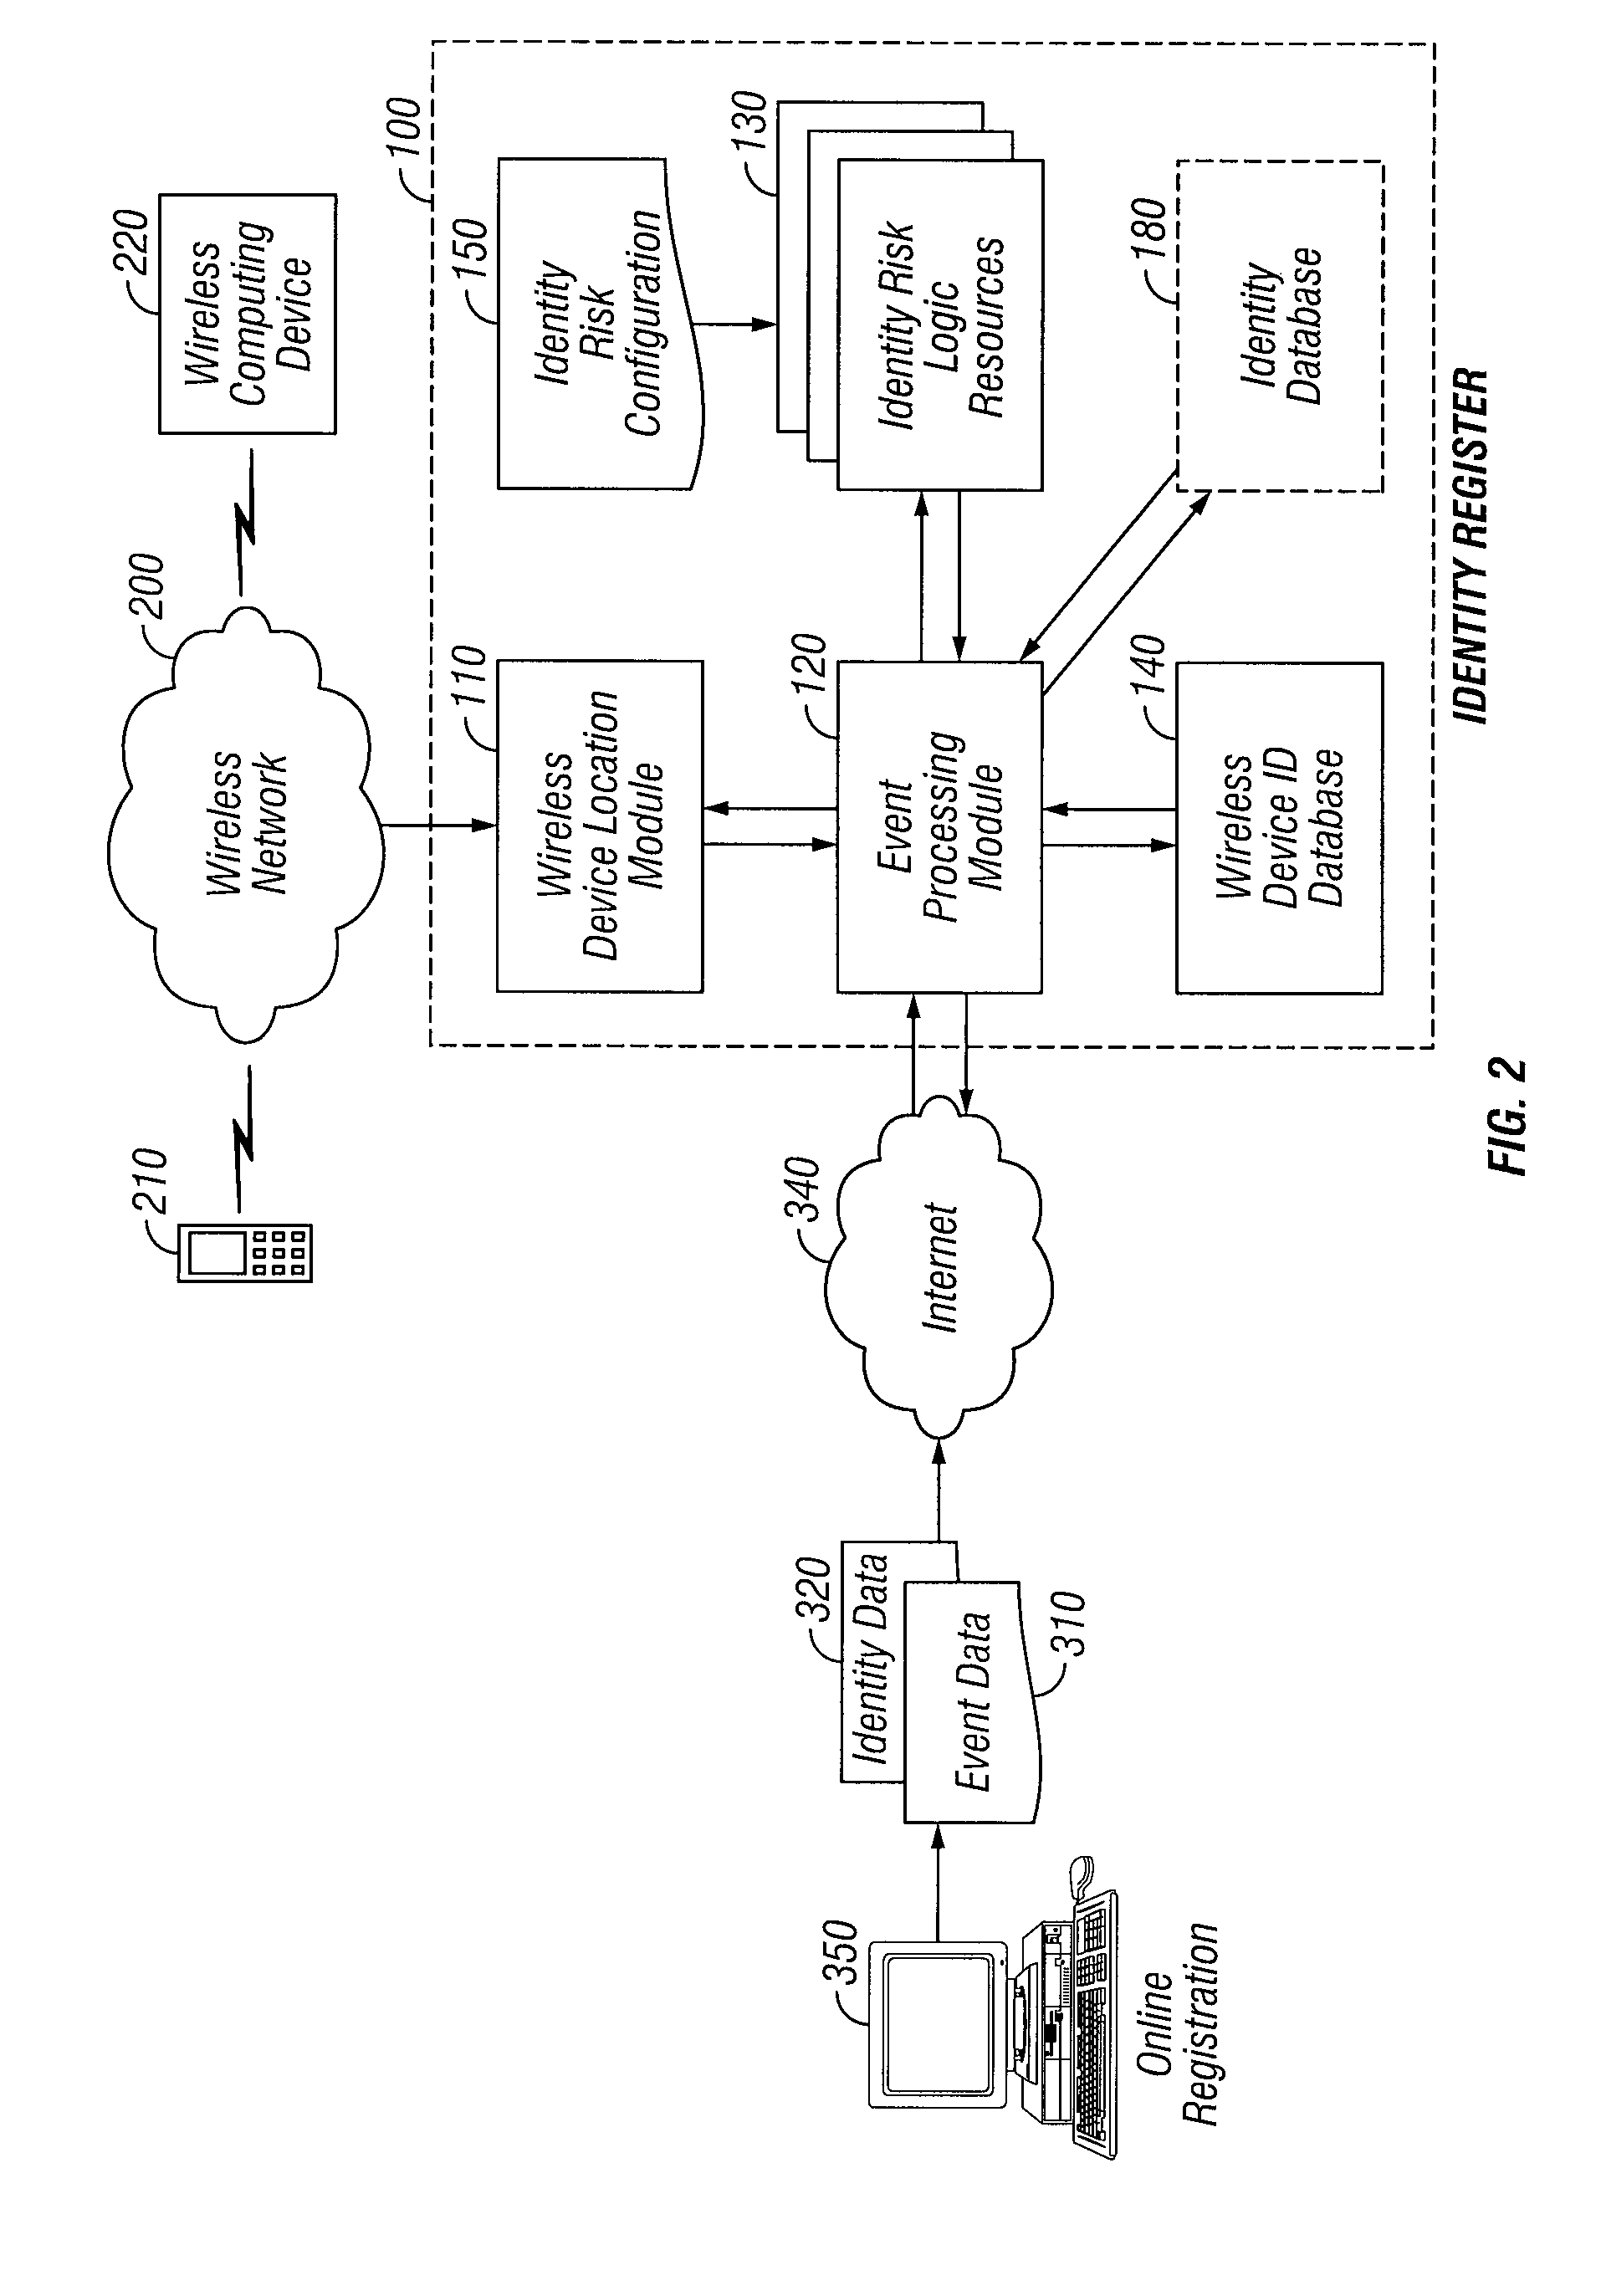 System and method for mobile identity protection of a user of multiple computer applications, networks or devices